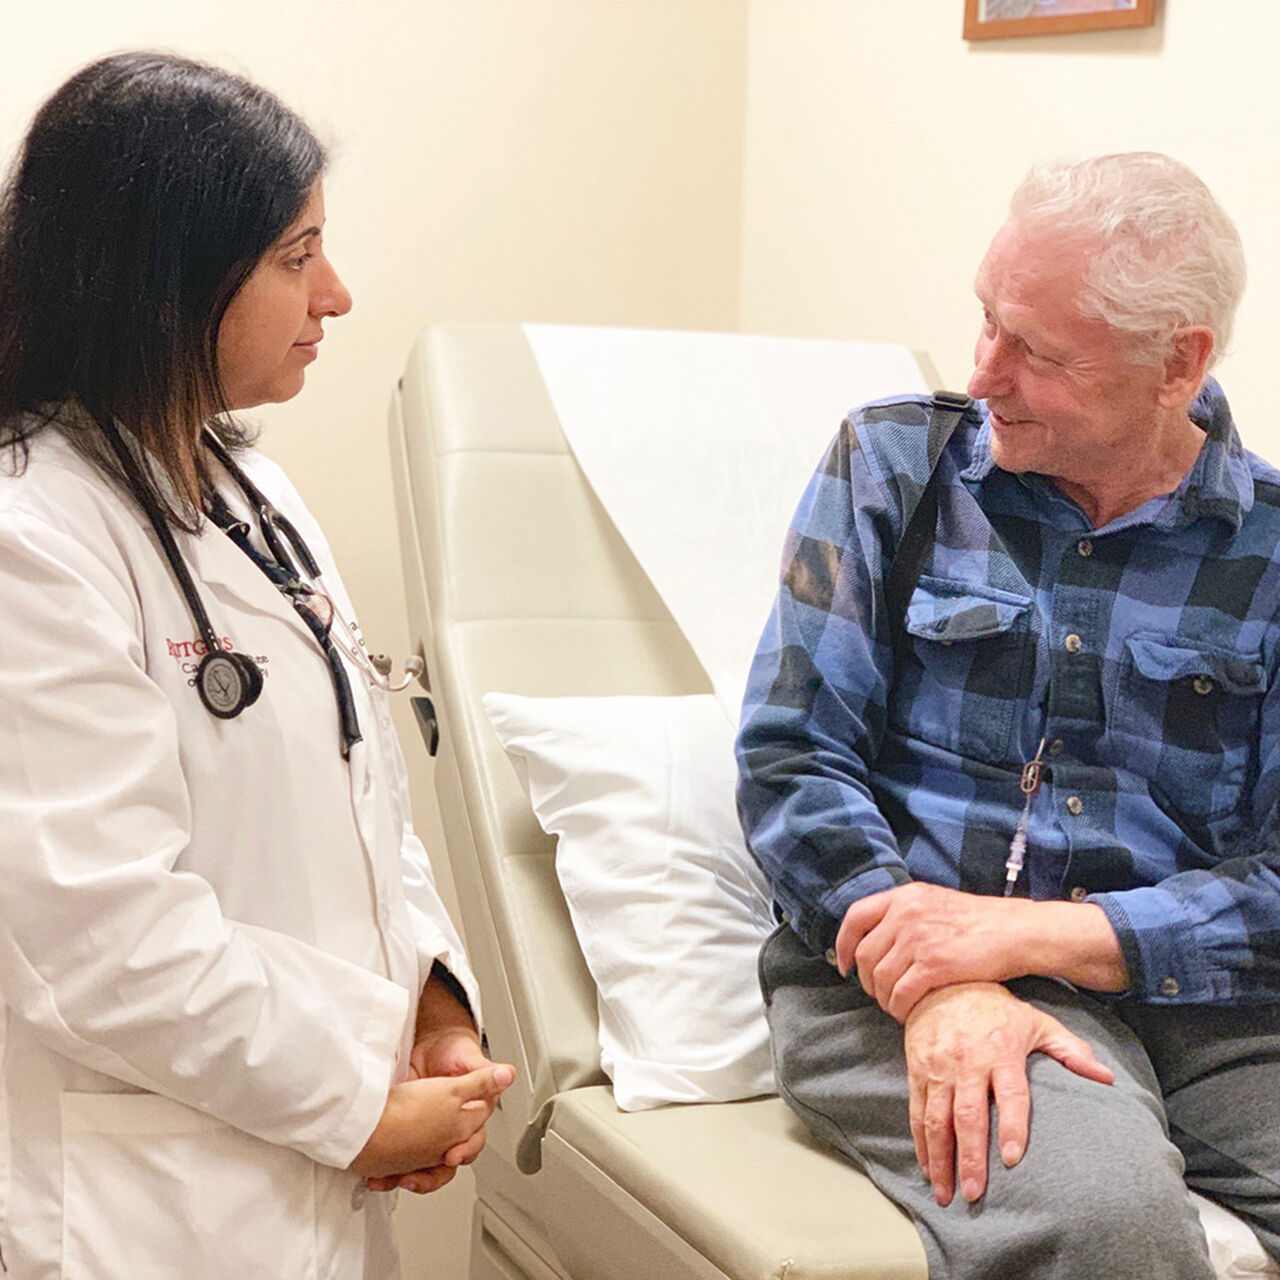 Cancer Institute physician talking with patient image number 0